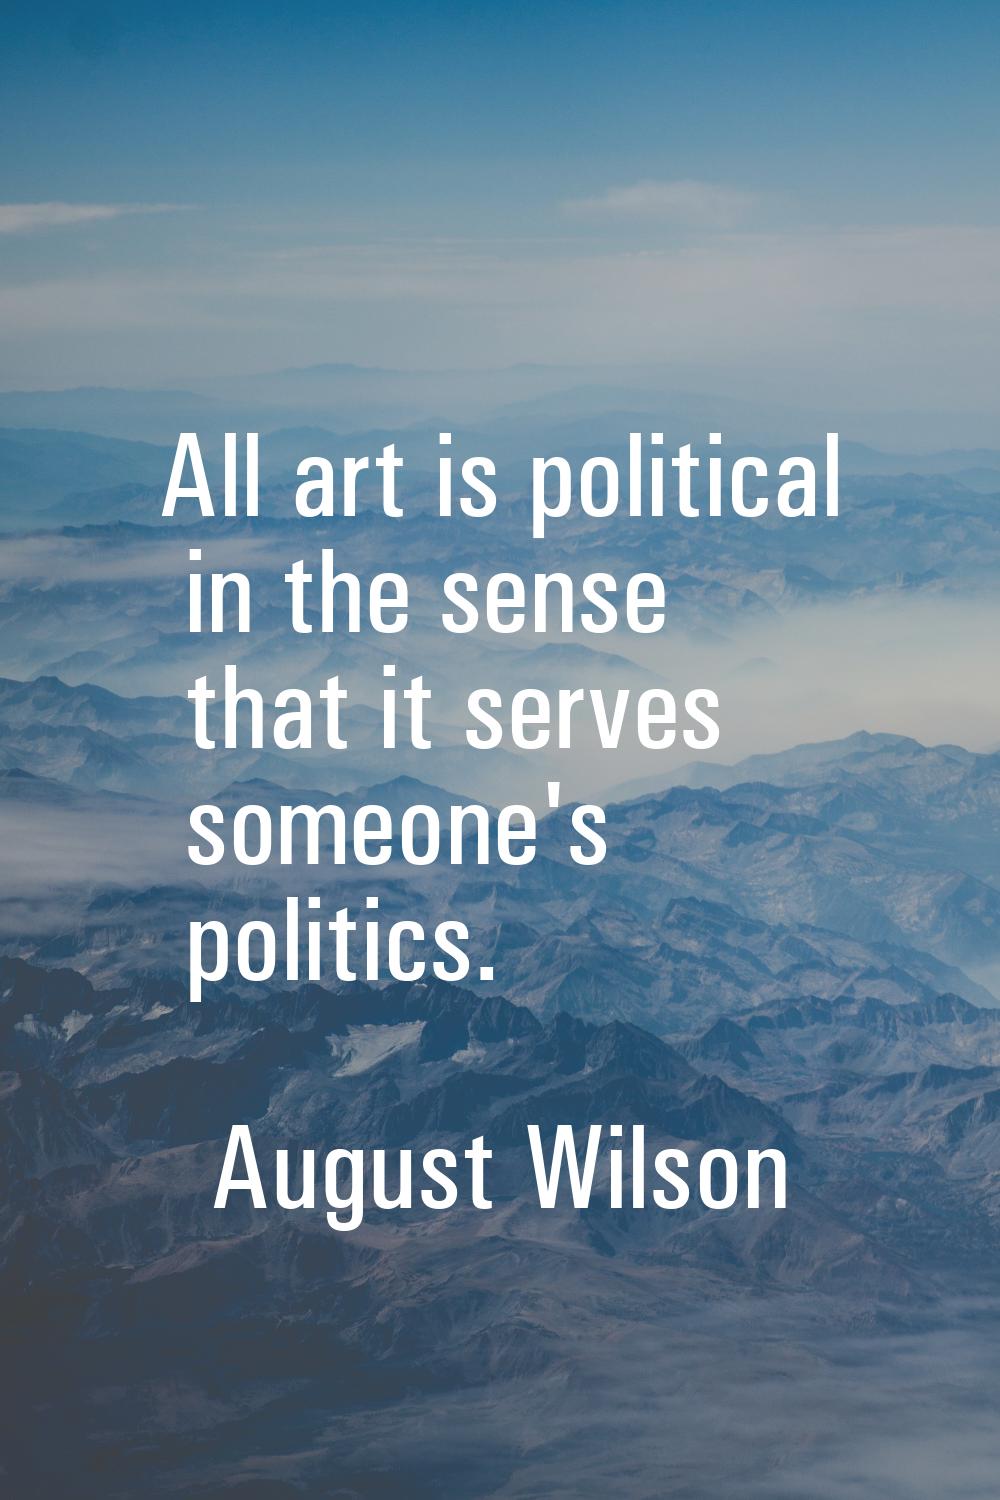 All art is political in the sense that it serves someone's politics.